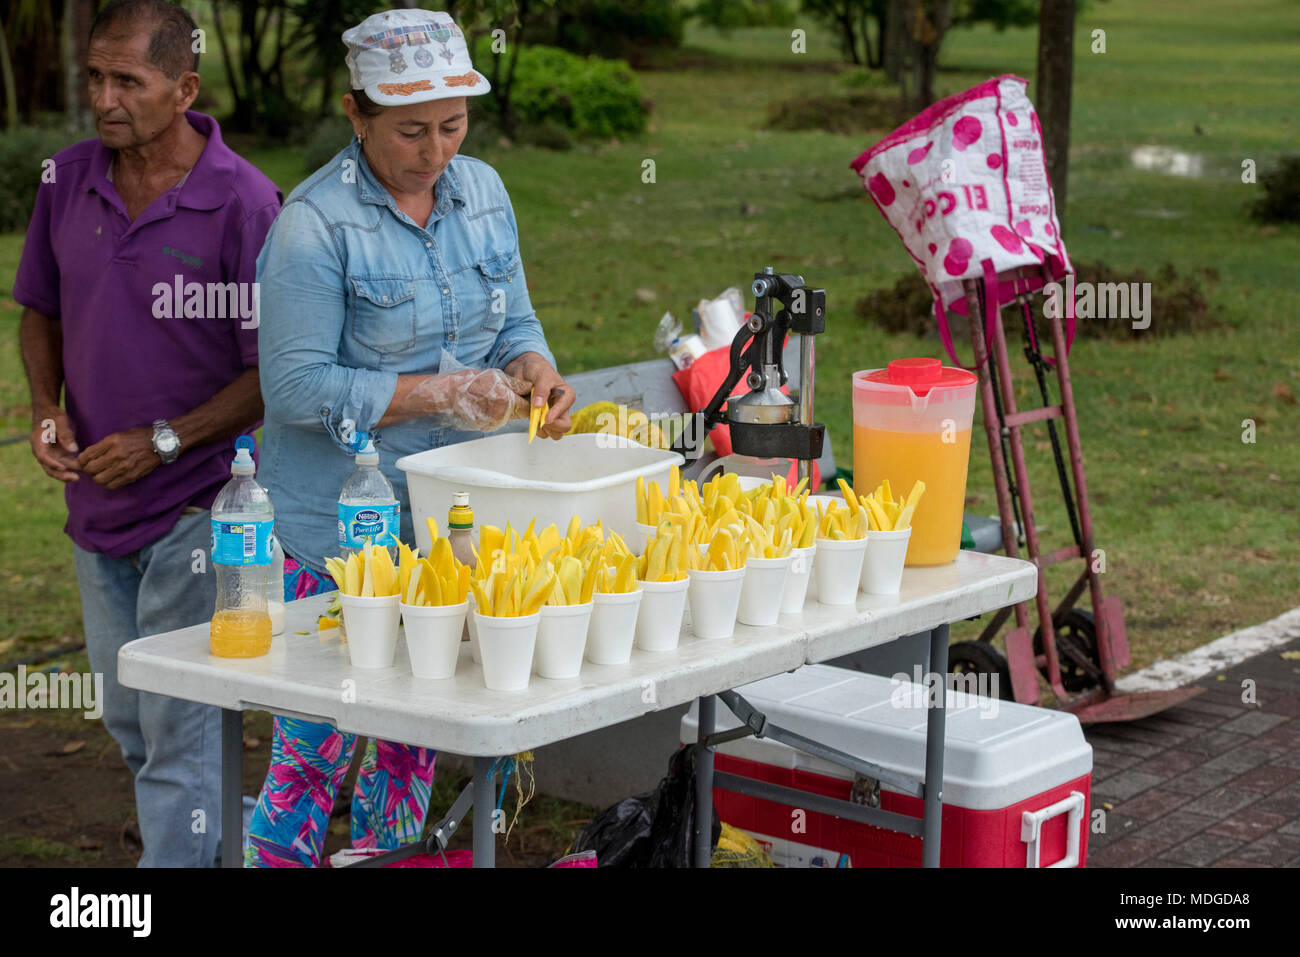 Woman selling fruit slices as cool refreshment, Corredor Sur, Panama City Stock Photo